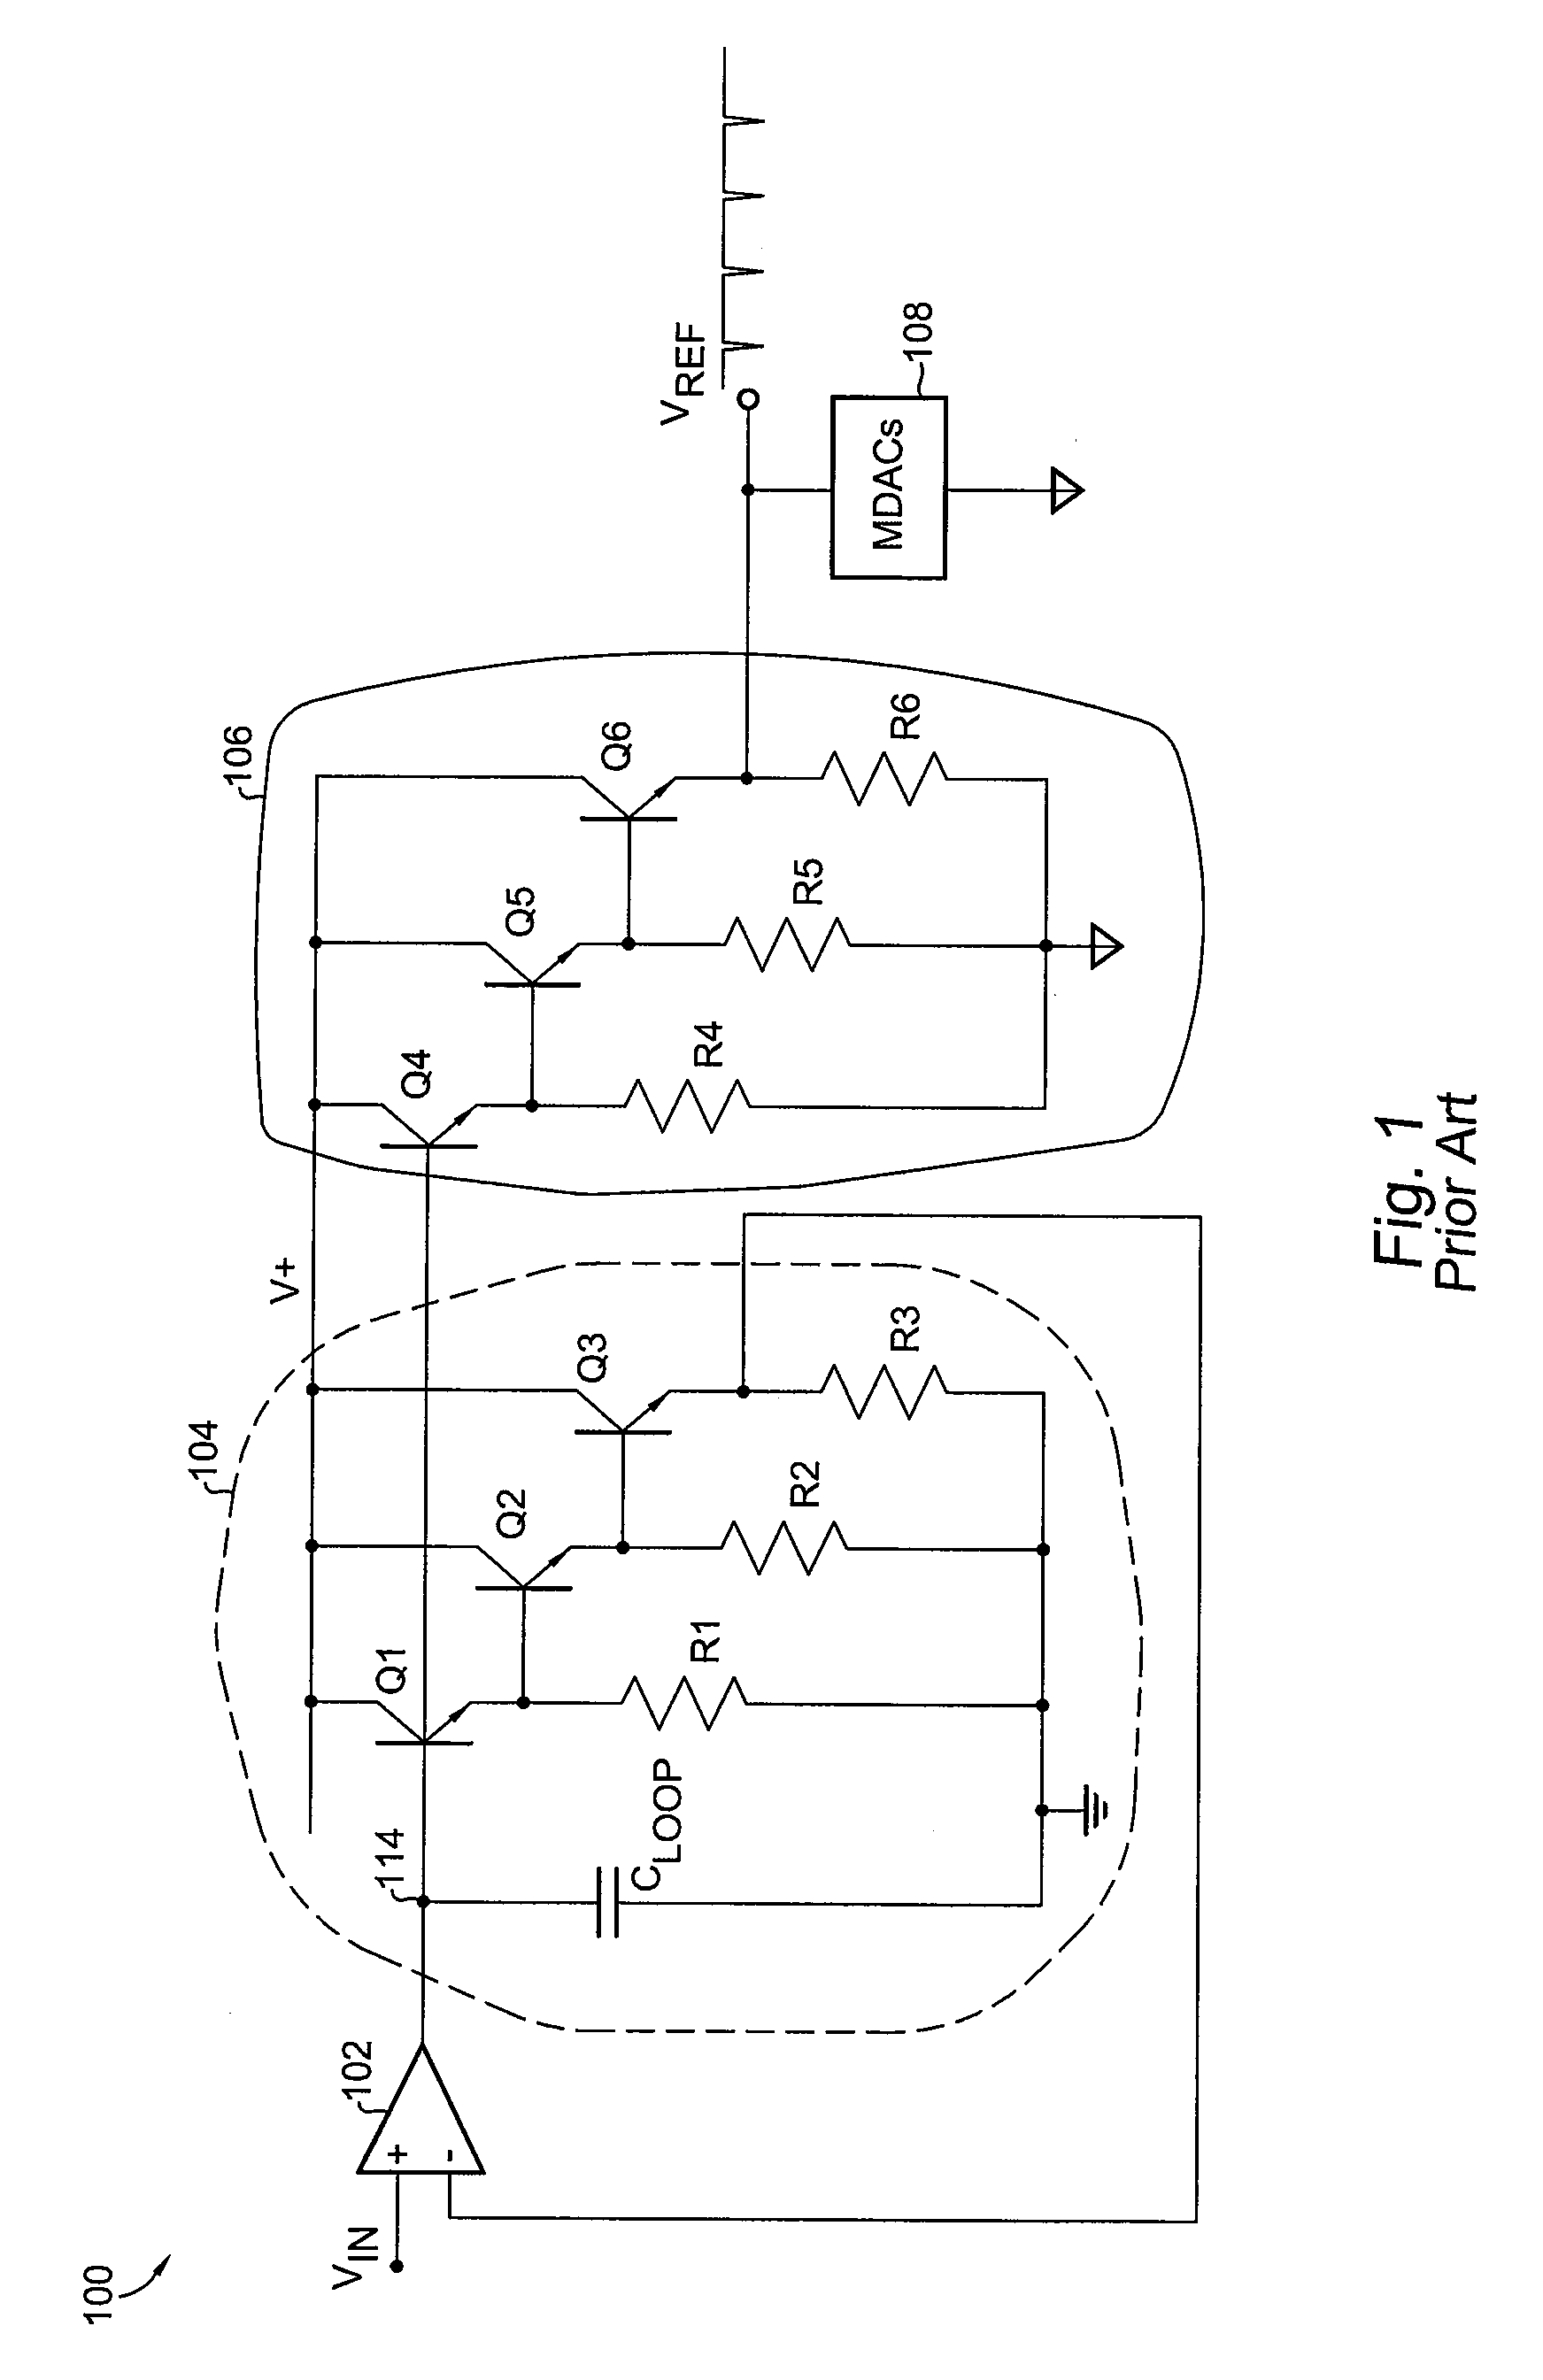 Radiation tolerant circuit for minimizing the dependence of a precision voltage reference from ground bounce and signal glitch